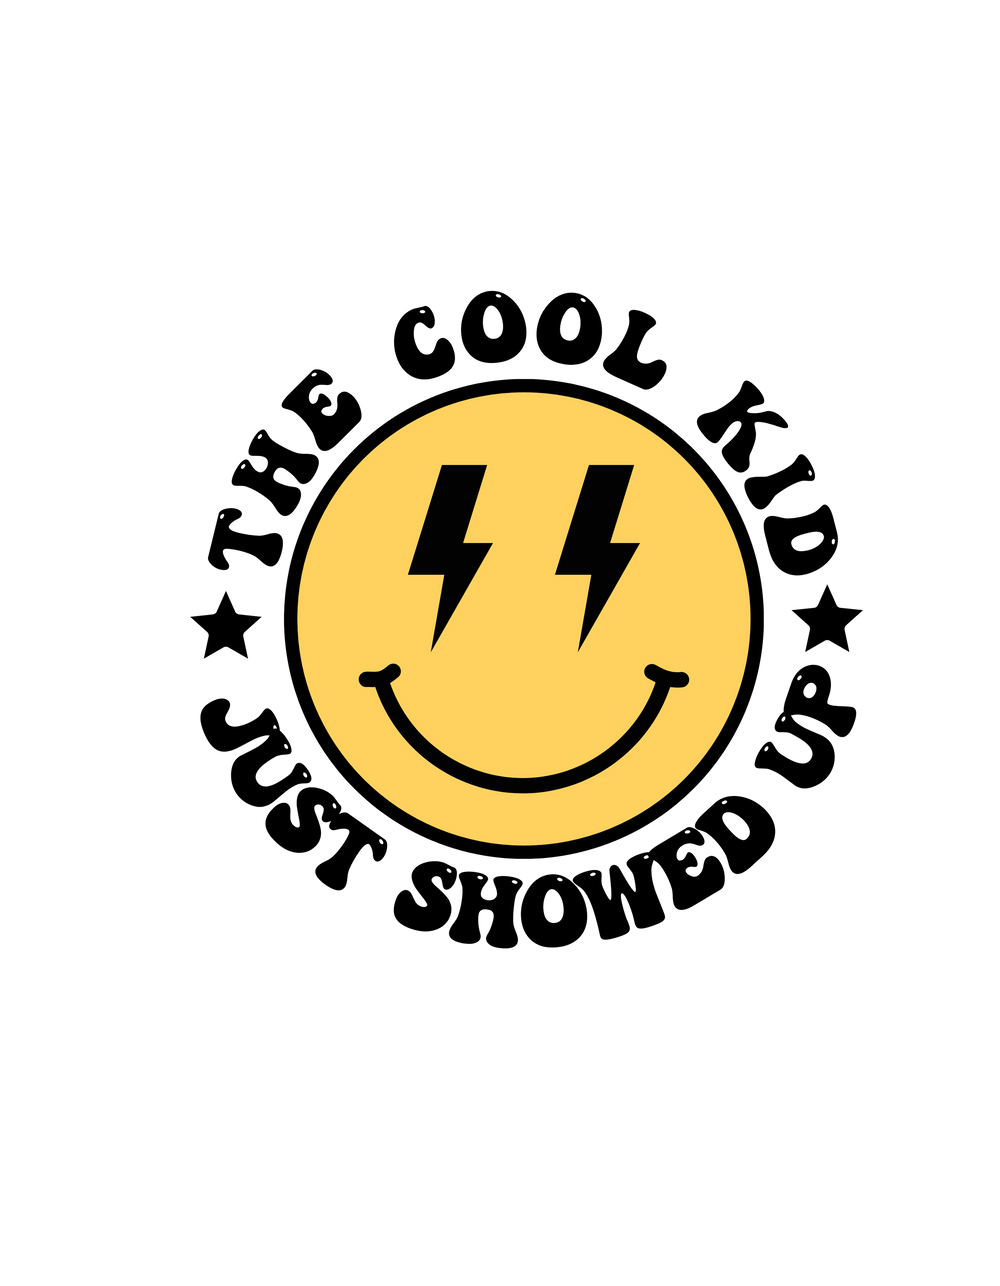 A kids heavy cotton tee featuring a yellow smiley face with lightning bolts and a smile. 100% cotton, light fabric, classic fit, tear-away label. The Cool Kid Just Showed Up by Worlds Worst Tees.